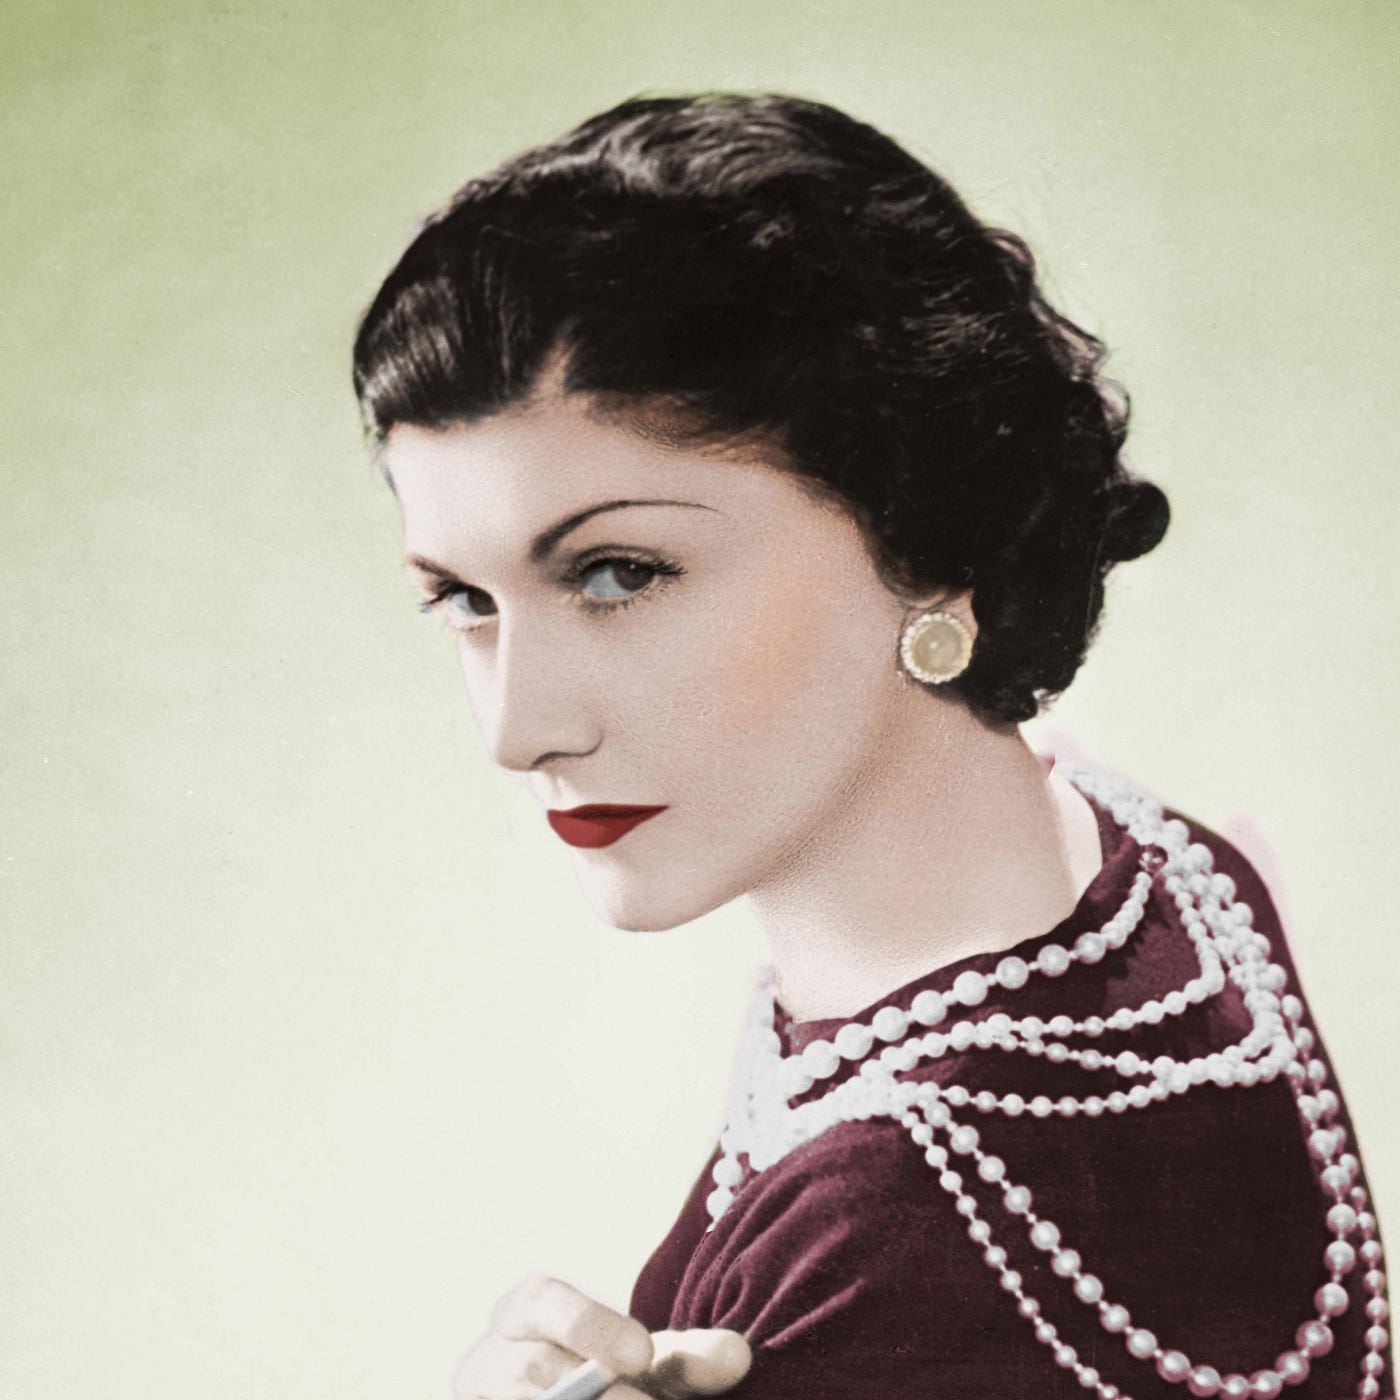 19 Things You Should Know About Coco Chanel